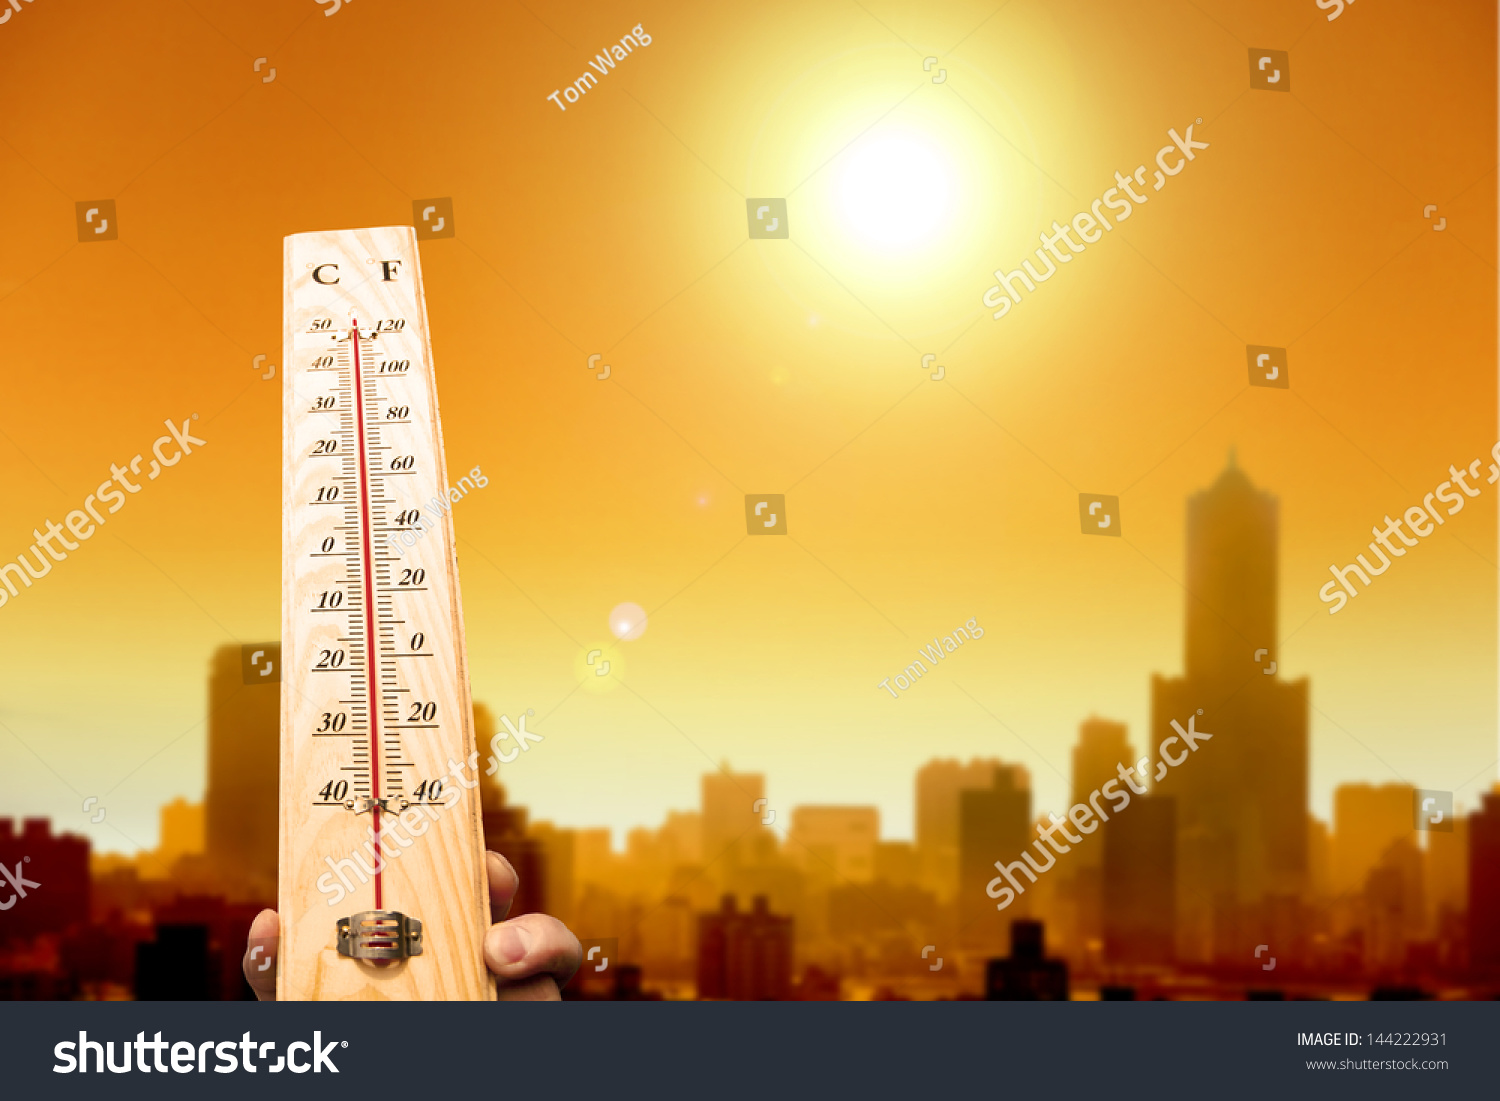 heat wave in the city and hand showing thermometer for high temperature #144222931